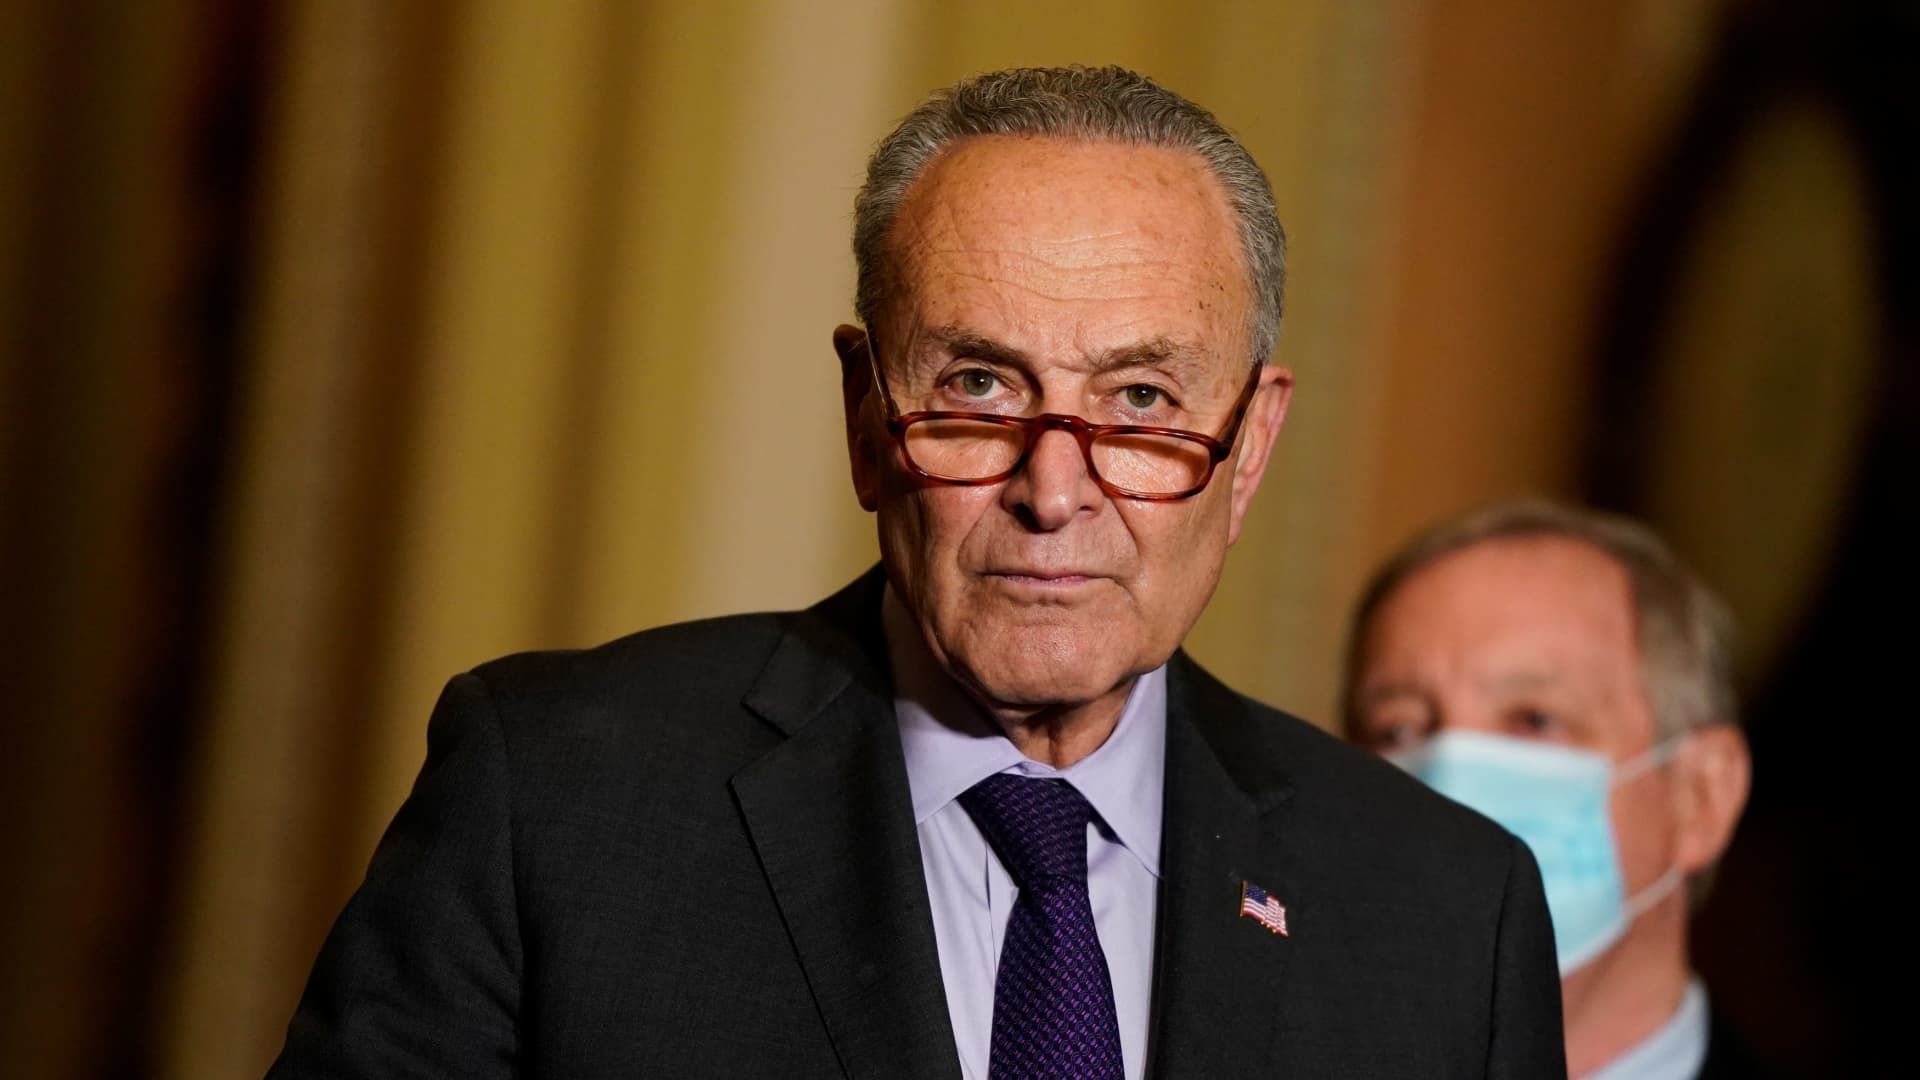 U.S. Senate Majority Leader Chuck Schumer (D-NY) speaks to reporters following the Senate Democrats weekly policy lunch at the U.S. Capitol in Washington, November 30, 2021.